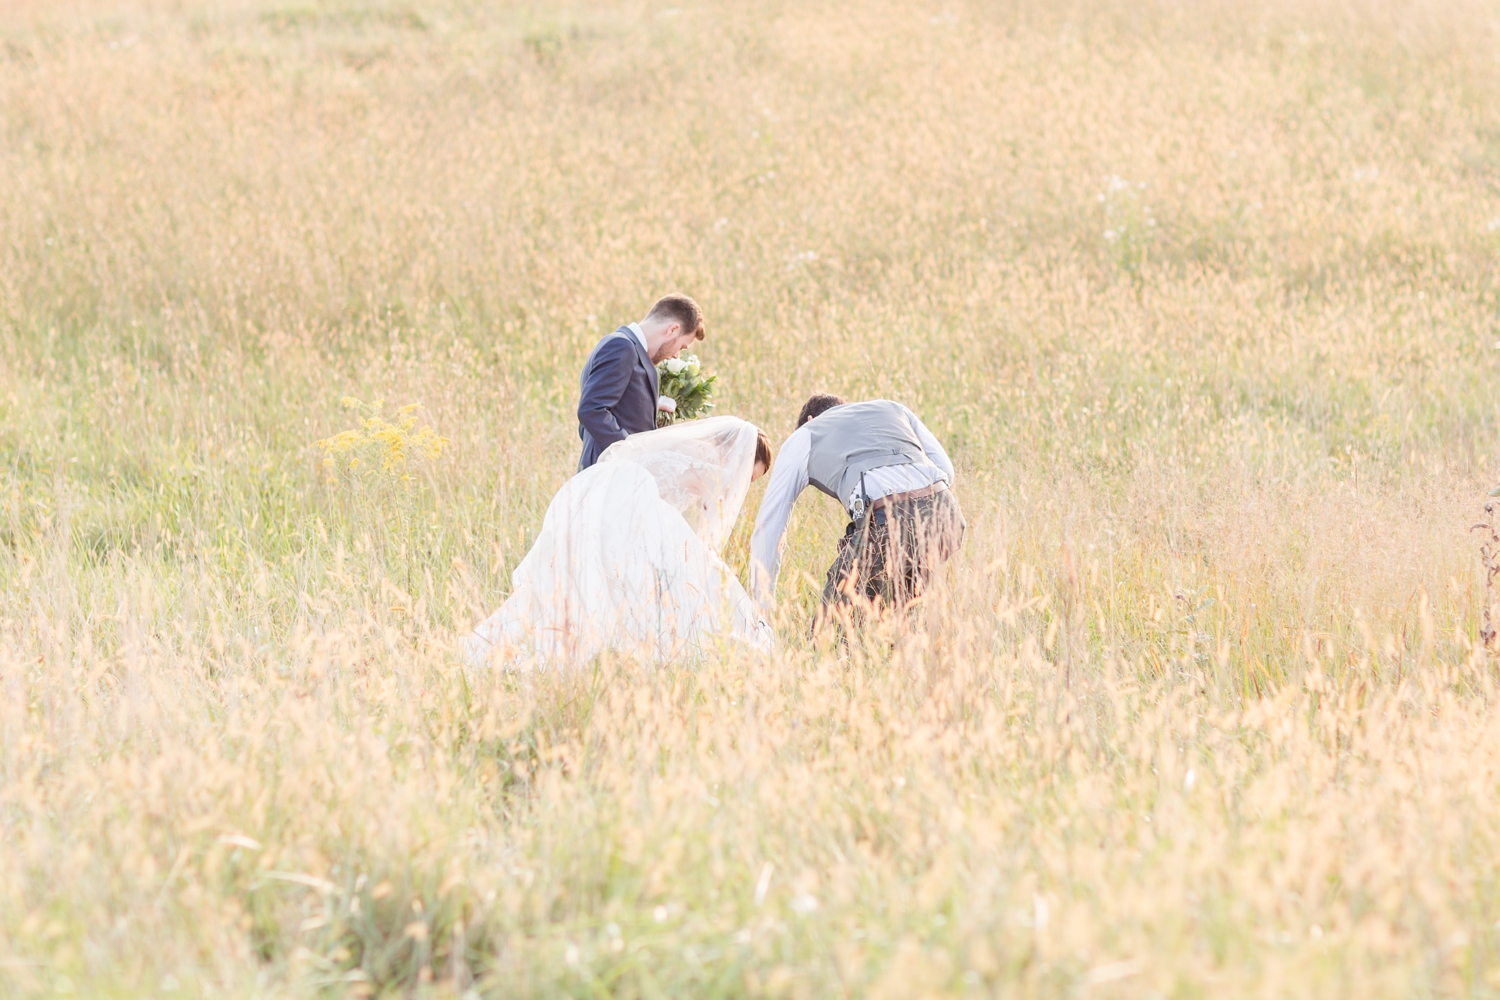  Kevin helping to make sure Kristen’s dress didn’t get caught in the field! 